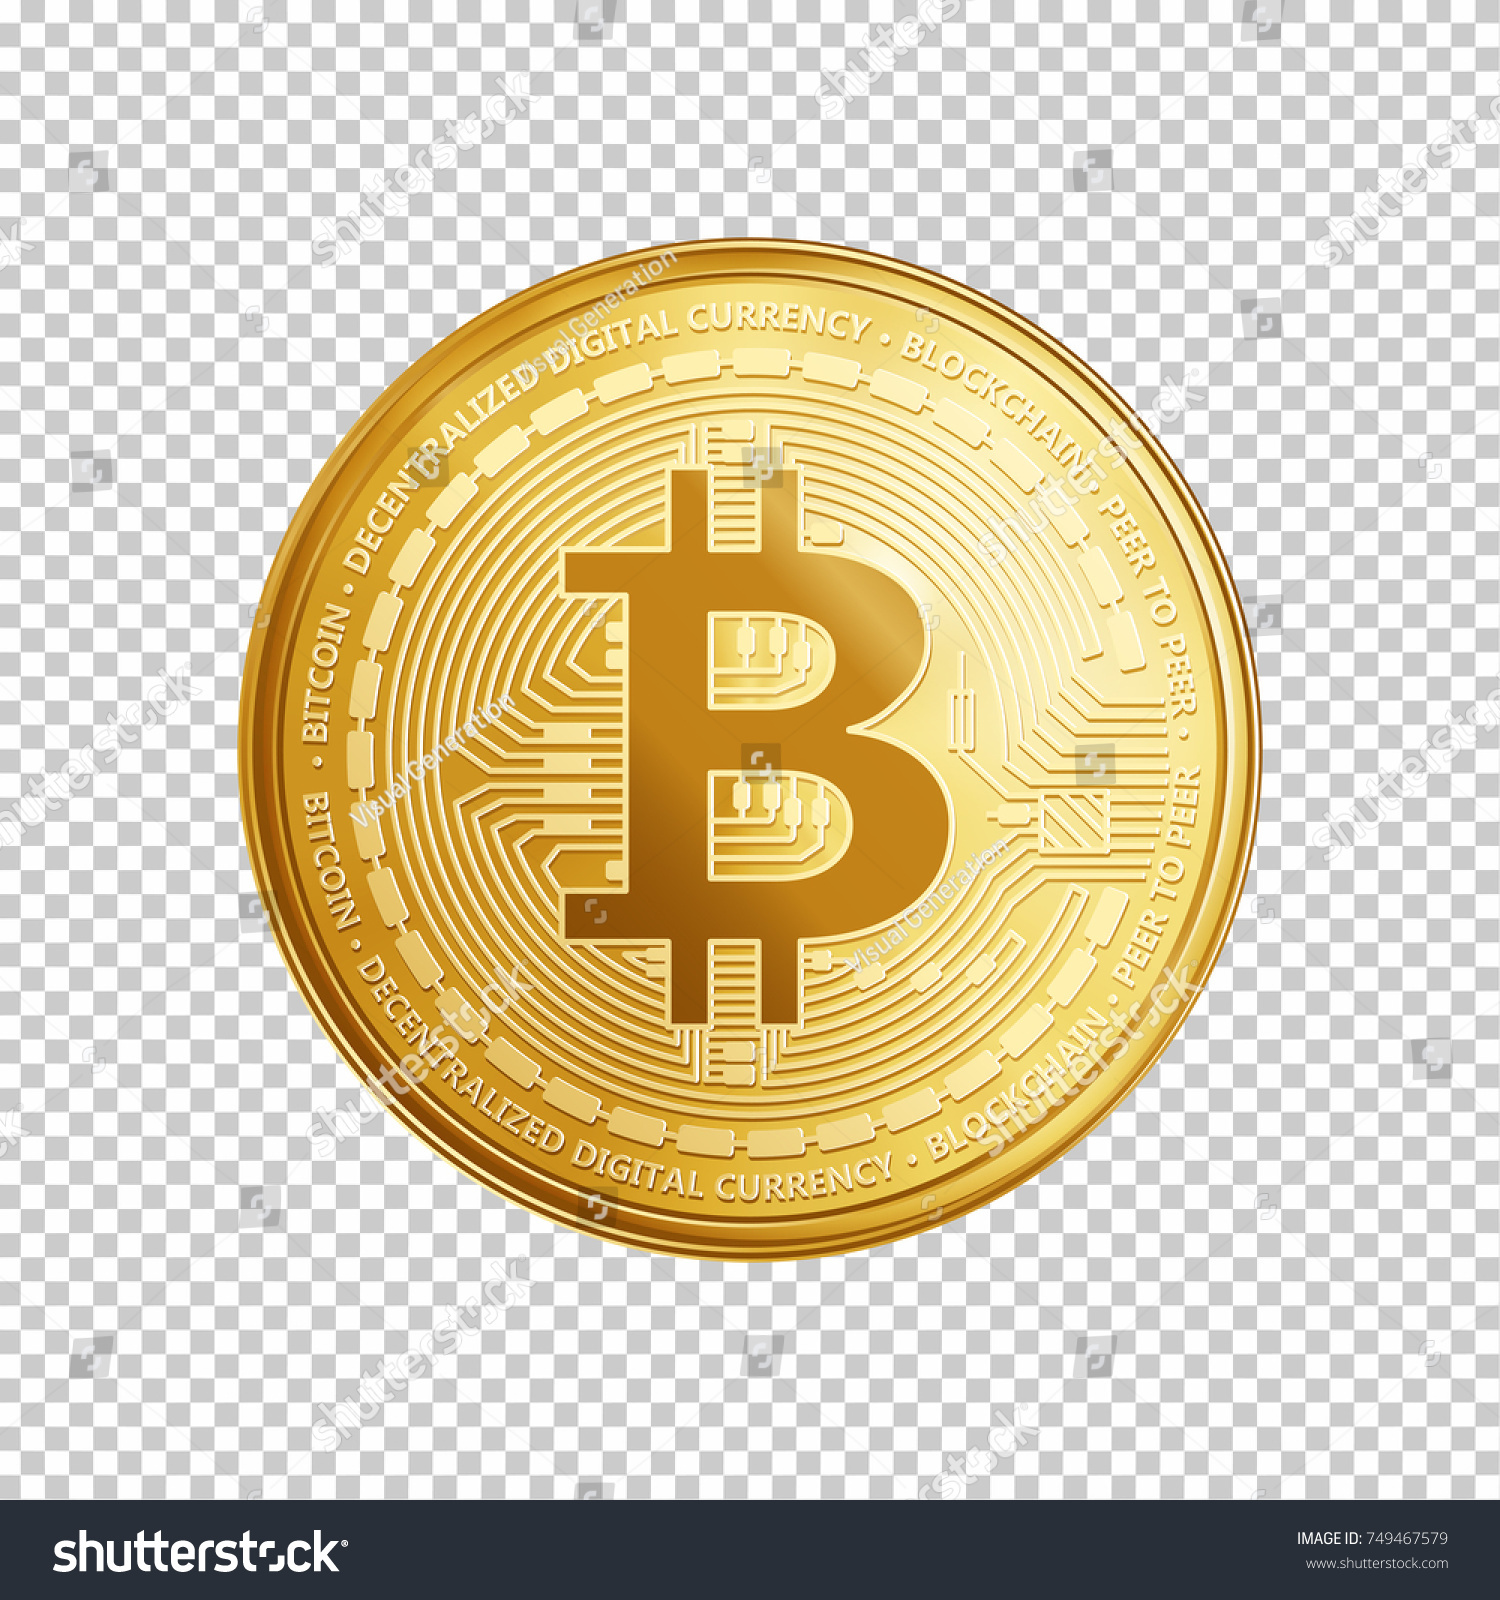 SVG of Golden bitcoin coin. Crypto currency golden coin bitcoin symbol isolated on transparent background. Realistic vector illustration. svg